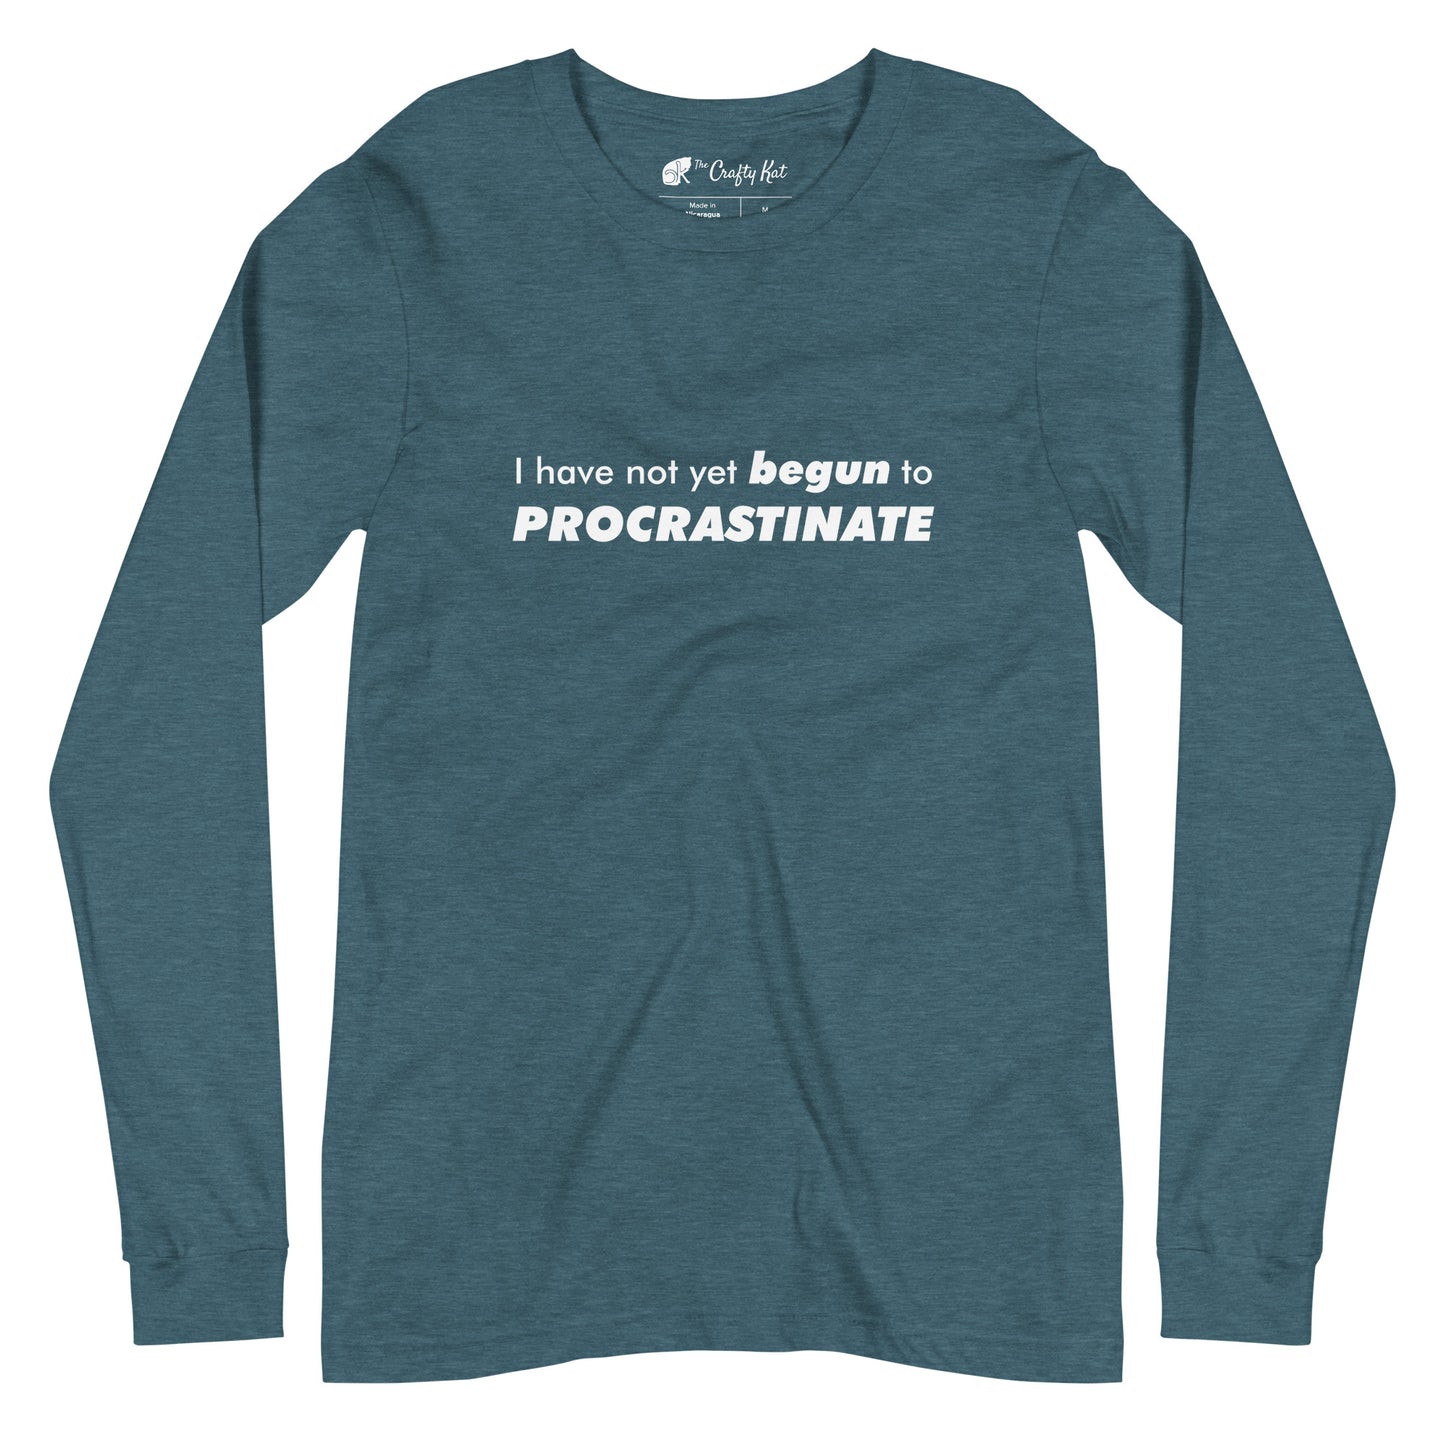 Heather Deep Teal long-sleeve shirt with text graphic: "I have not yet BEGUN to PROCRASTINATE"